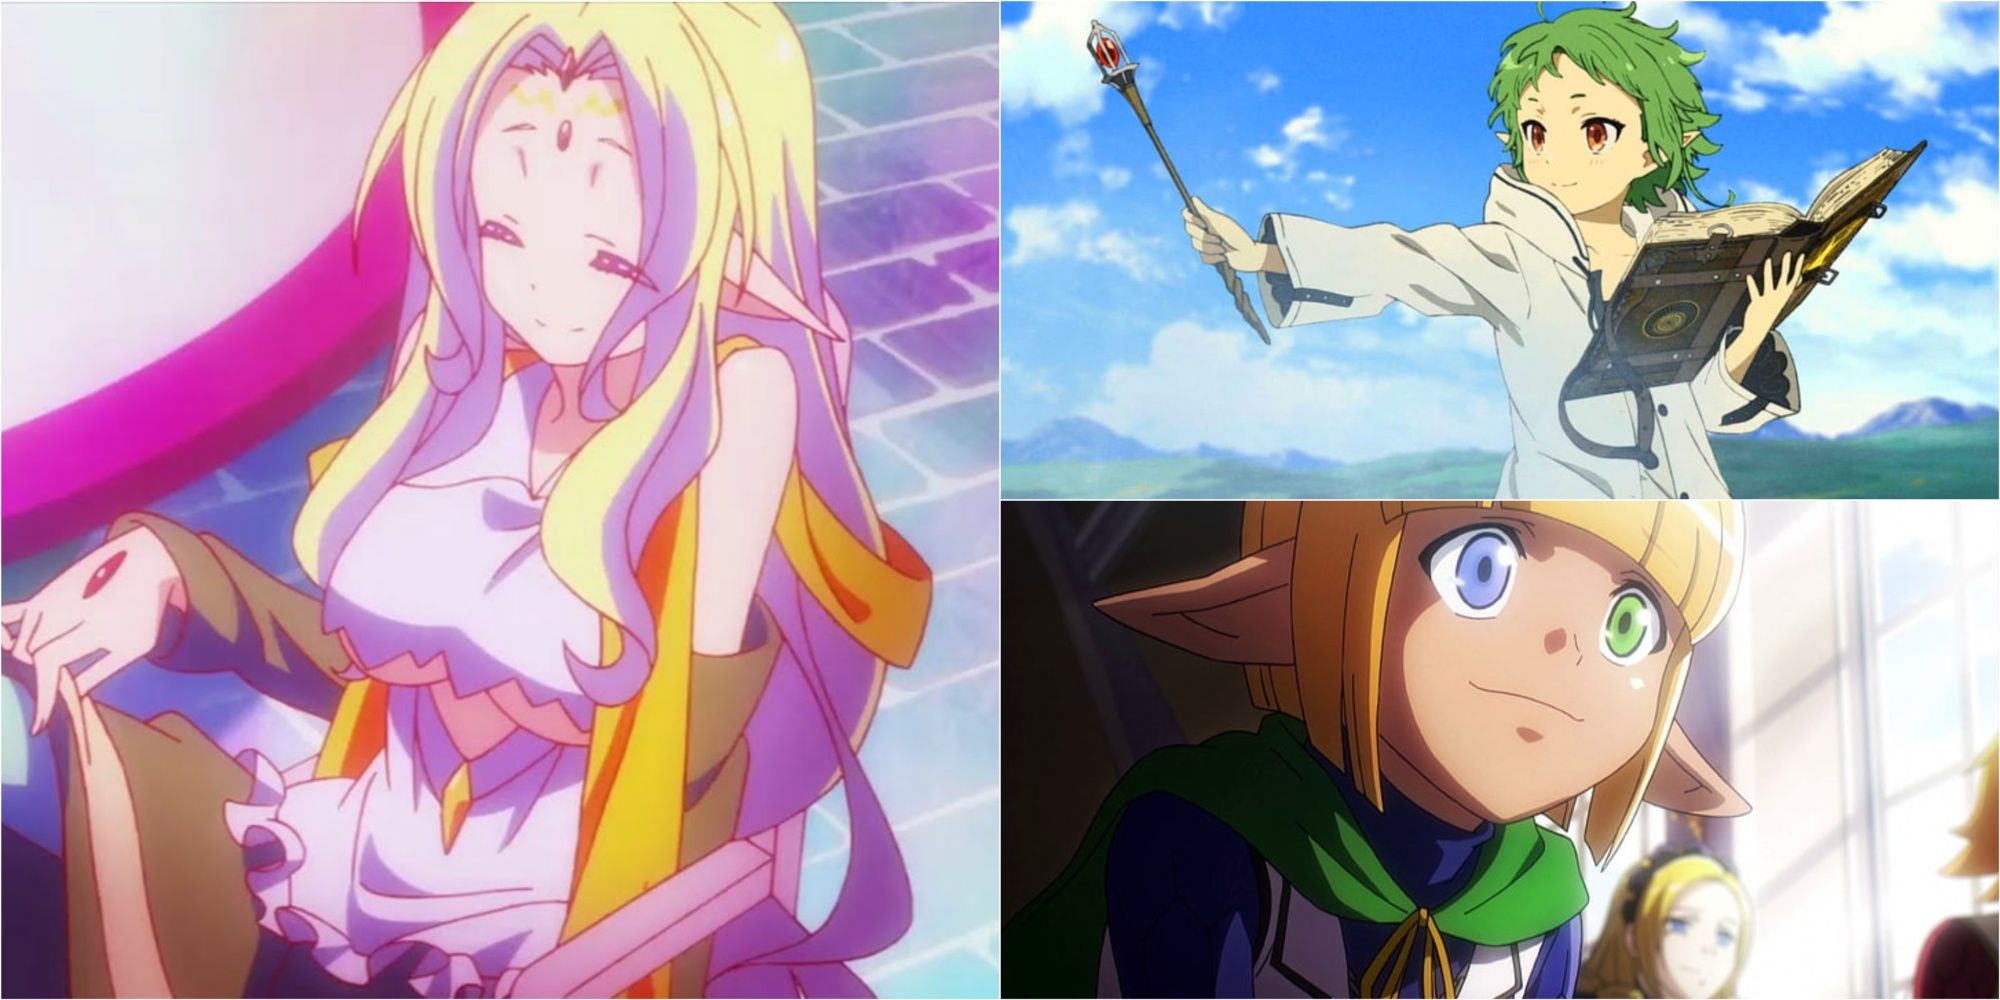 Strongest Elves In Isekai Anime featured image